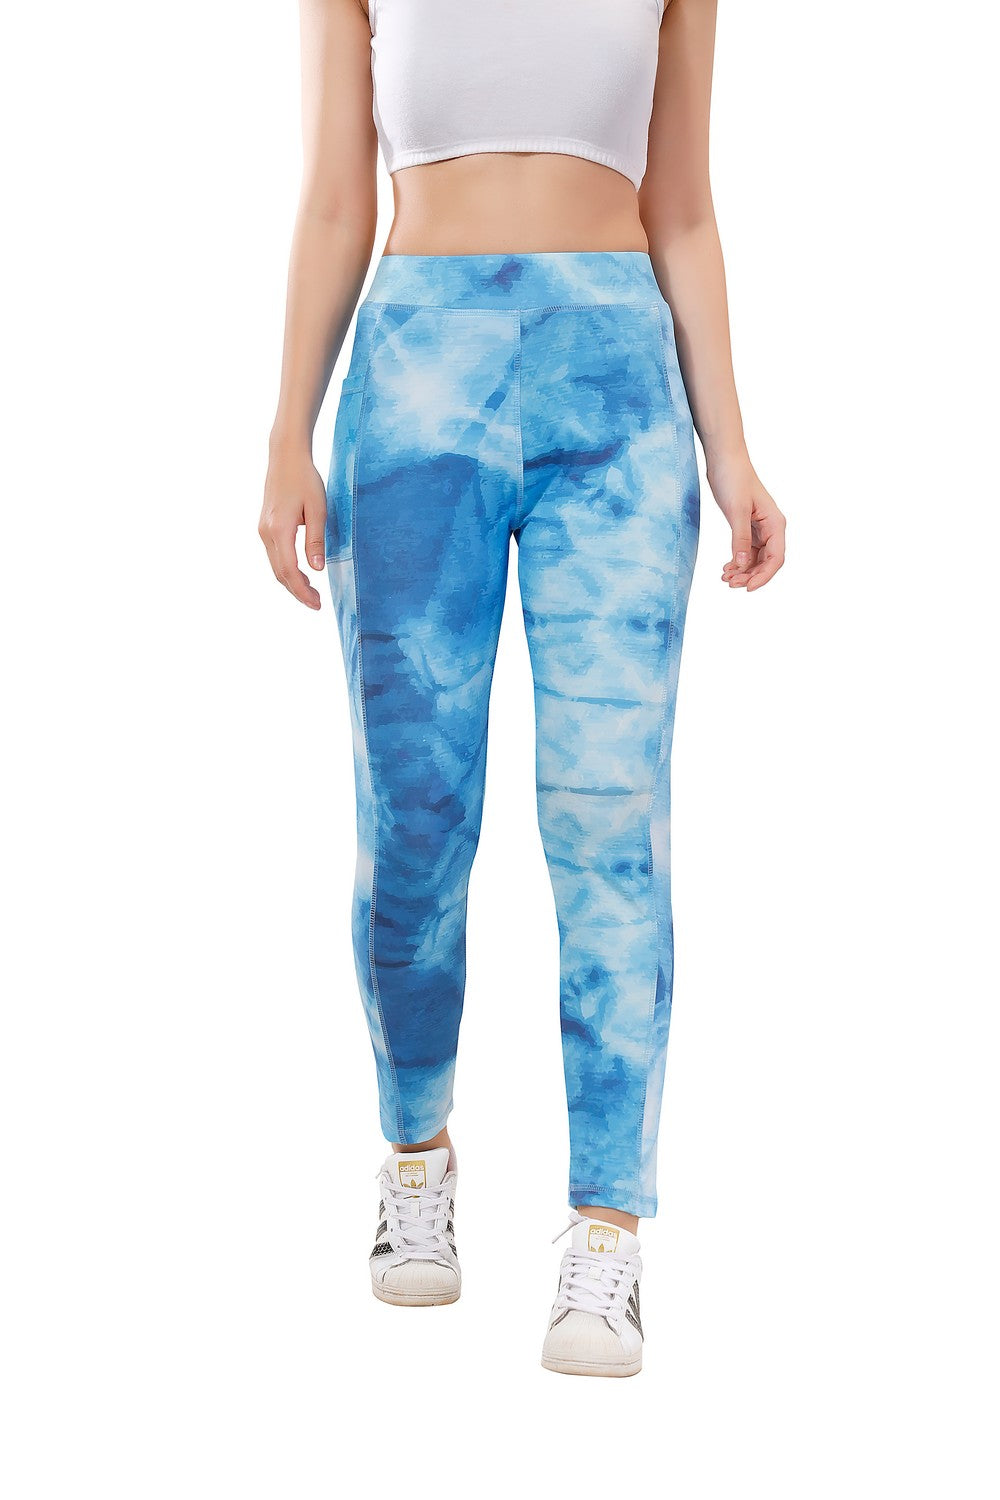 TRASA Active High Waist Printed Yoga Pants for Women's - Blue Camouflage